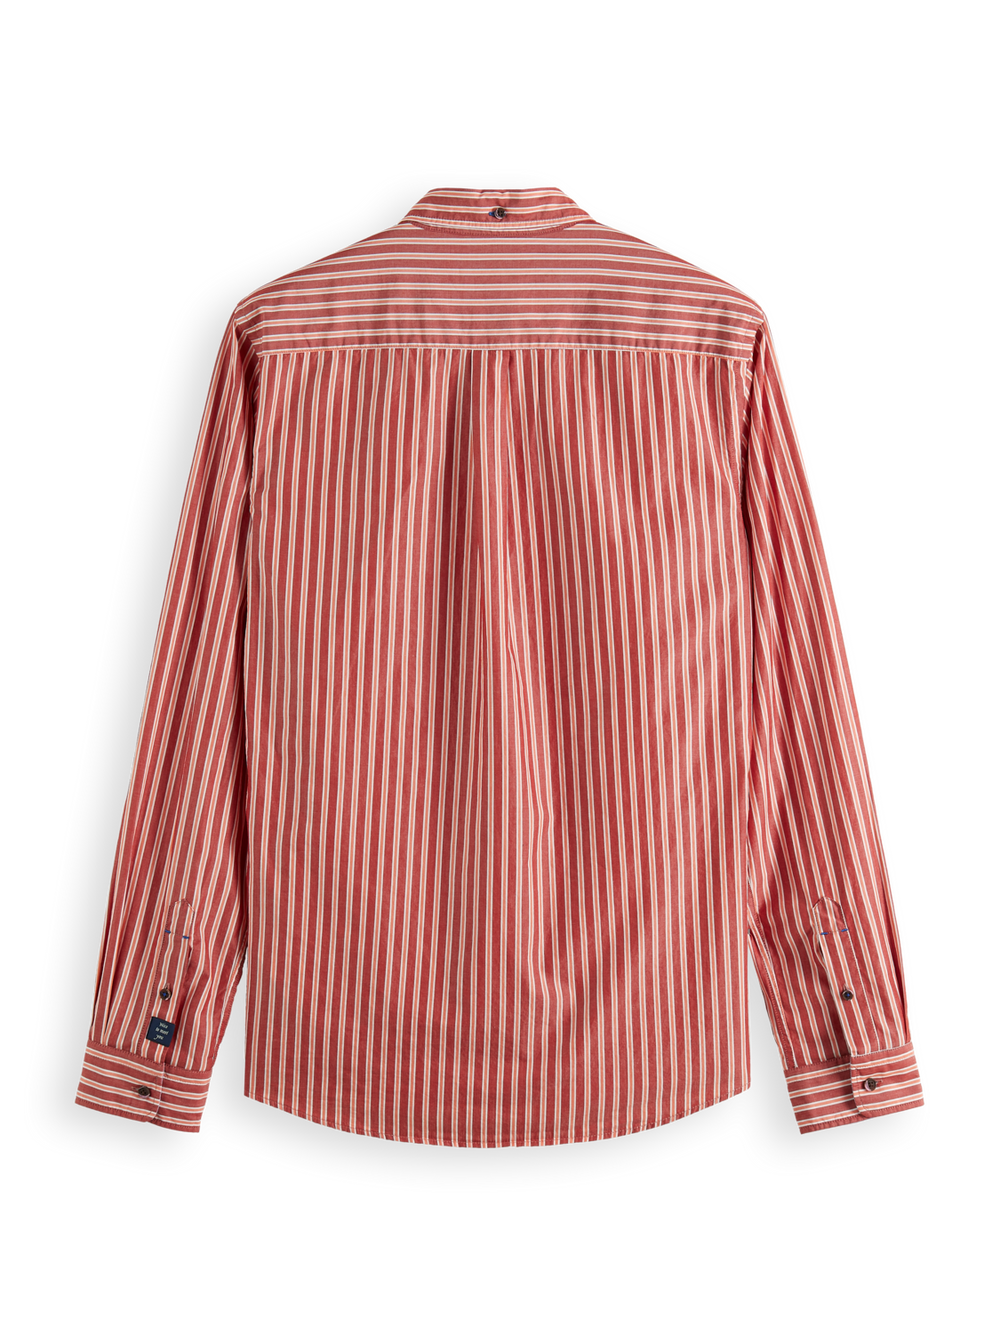 Slim Fit Striped Cotton Poplin Shirt Comb D 0220 | Buster McGee